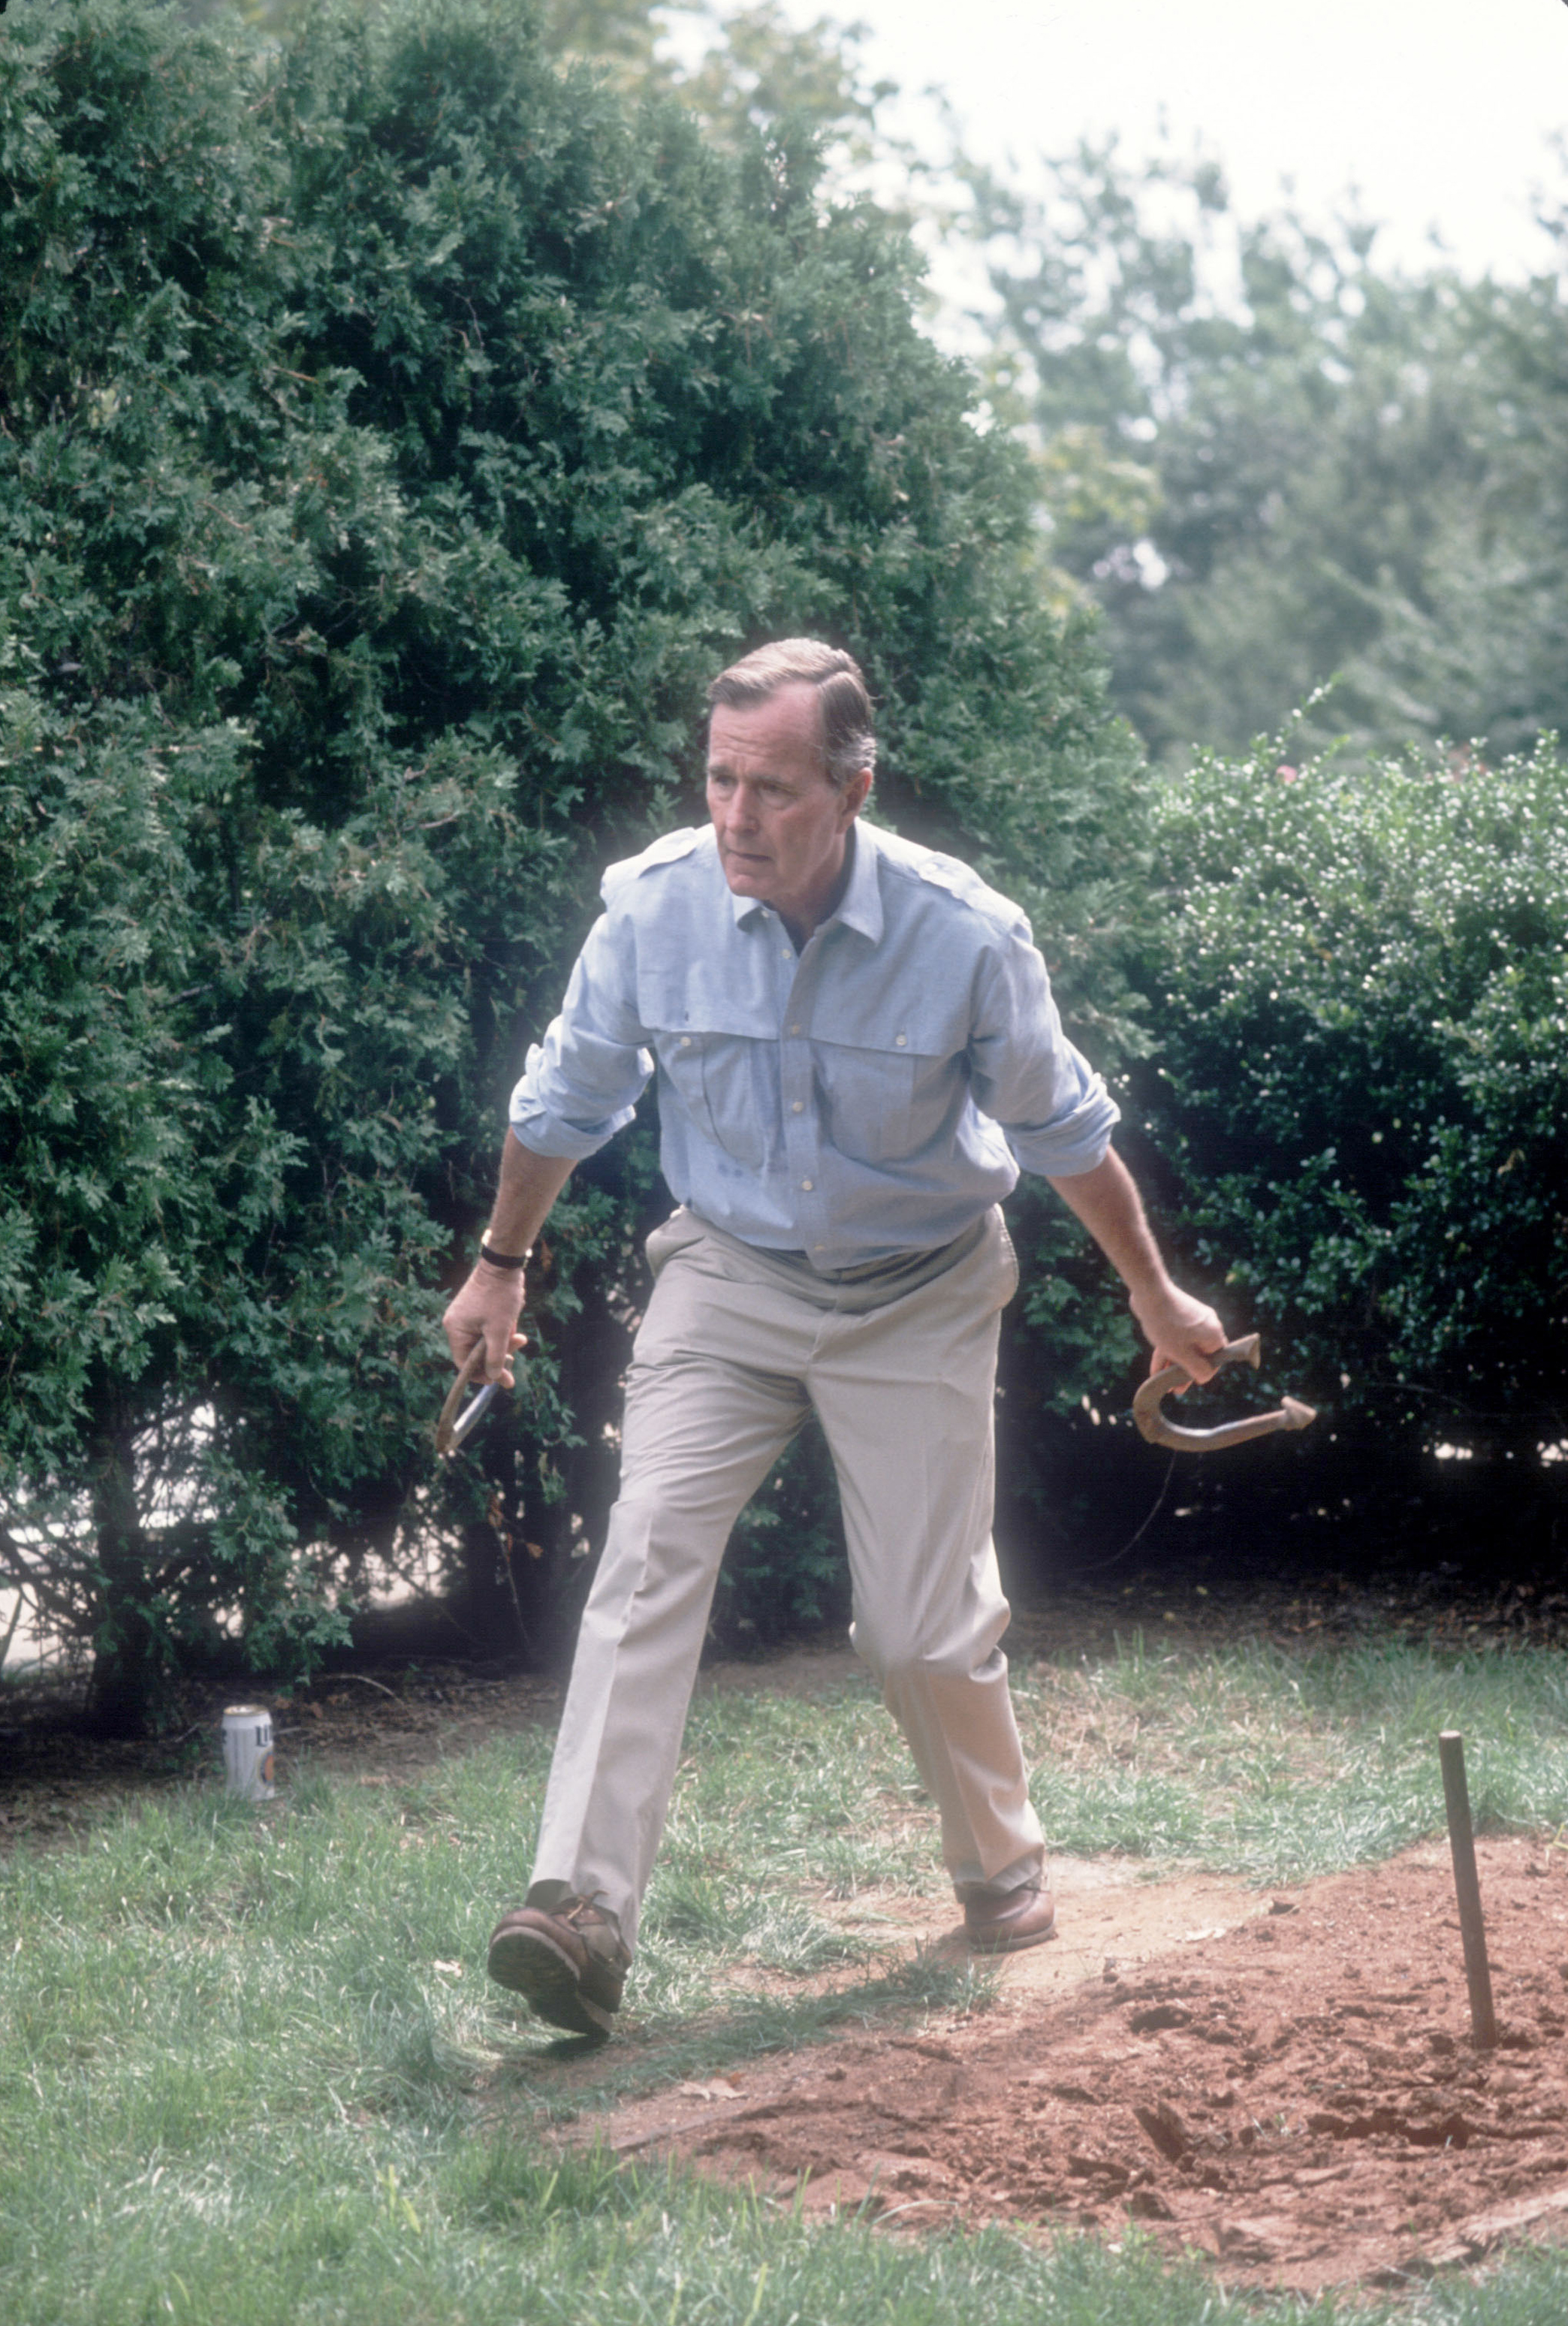 Vice President George H.W. Bush prepares to throw a horseshoe while on the campaign trail on September 3, 1988. Bush and his running mate Dan Quayle defeated Michael Dukakis in the Presidential election.